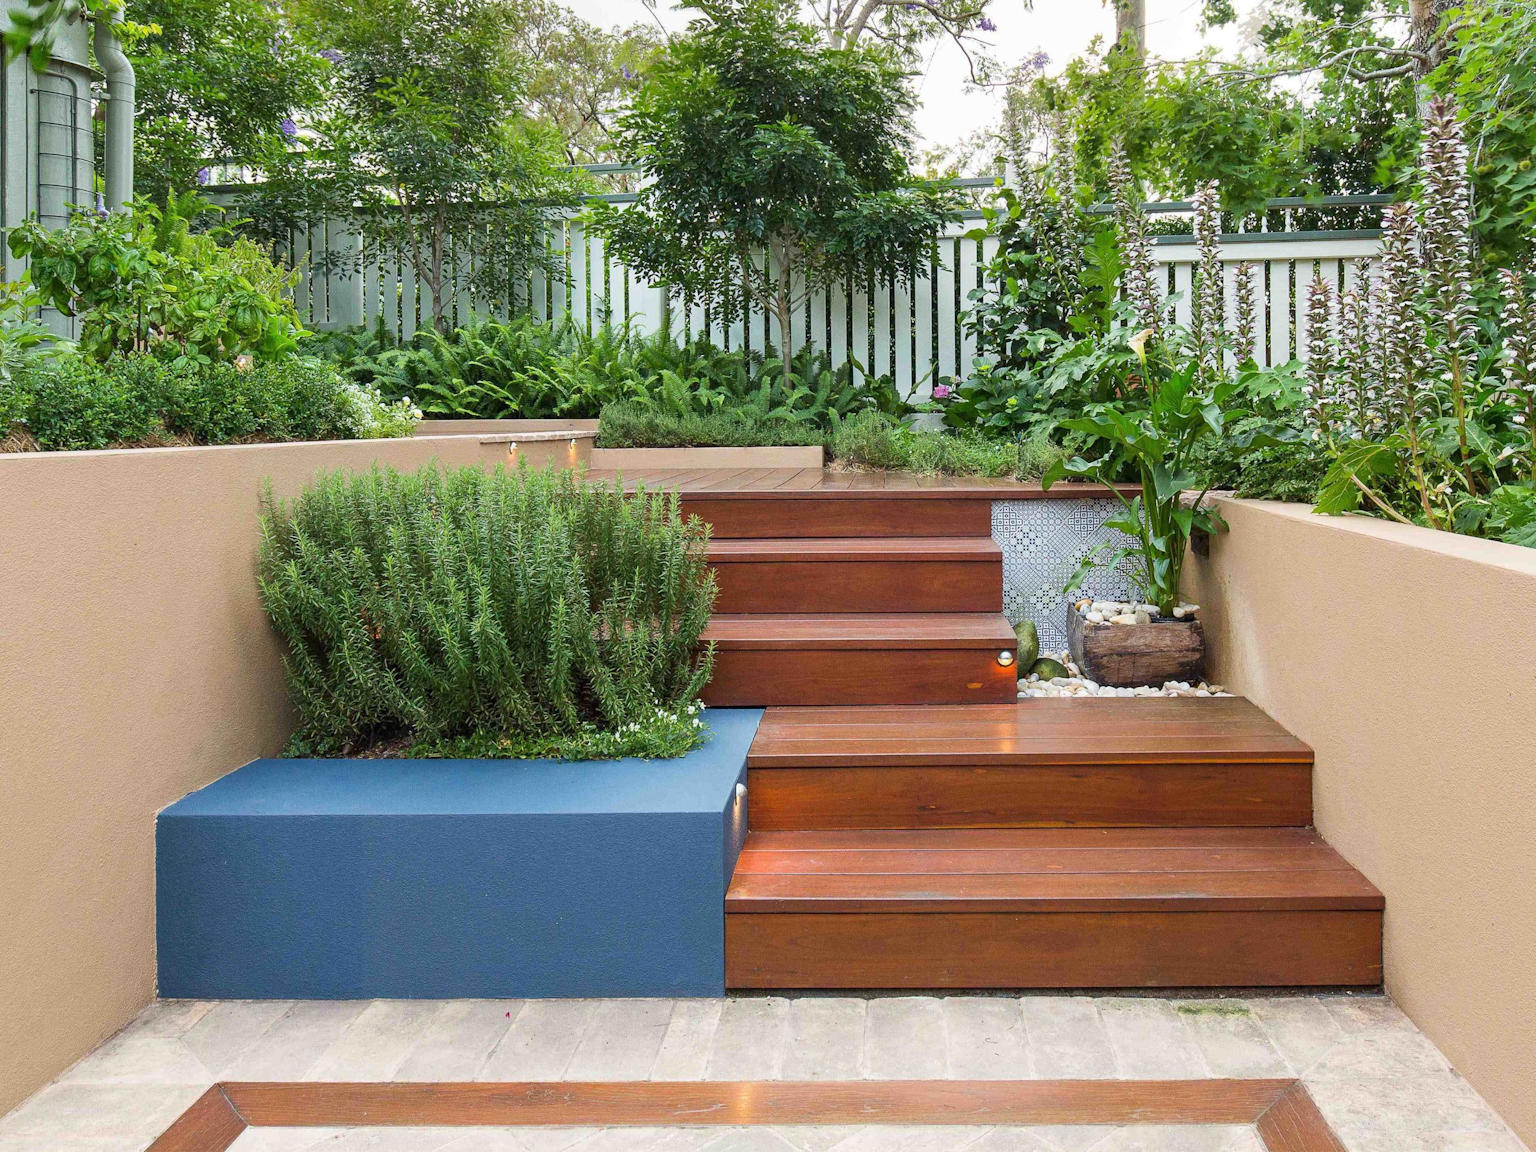 Antico Luce terracotta stone leading to timber decking stairs 